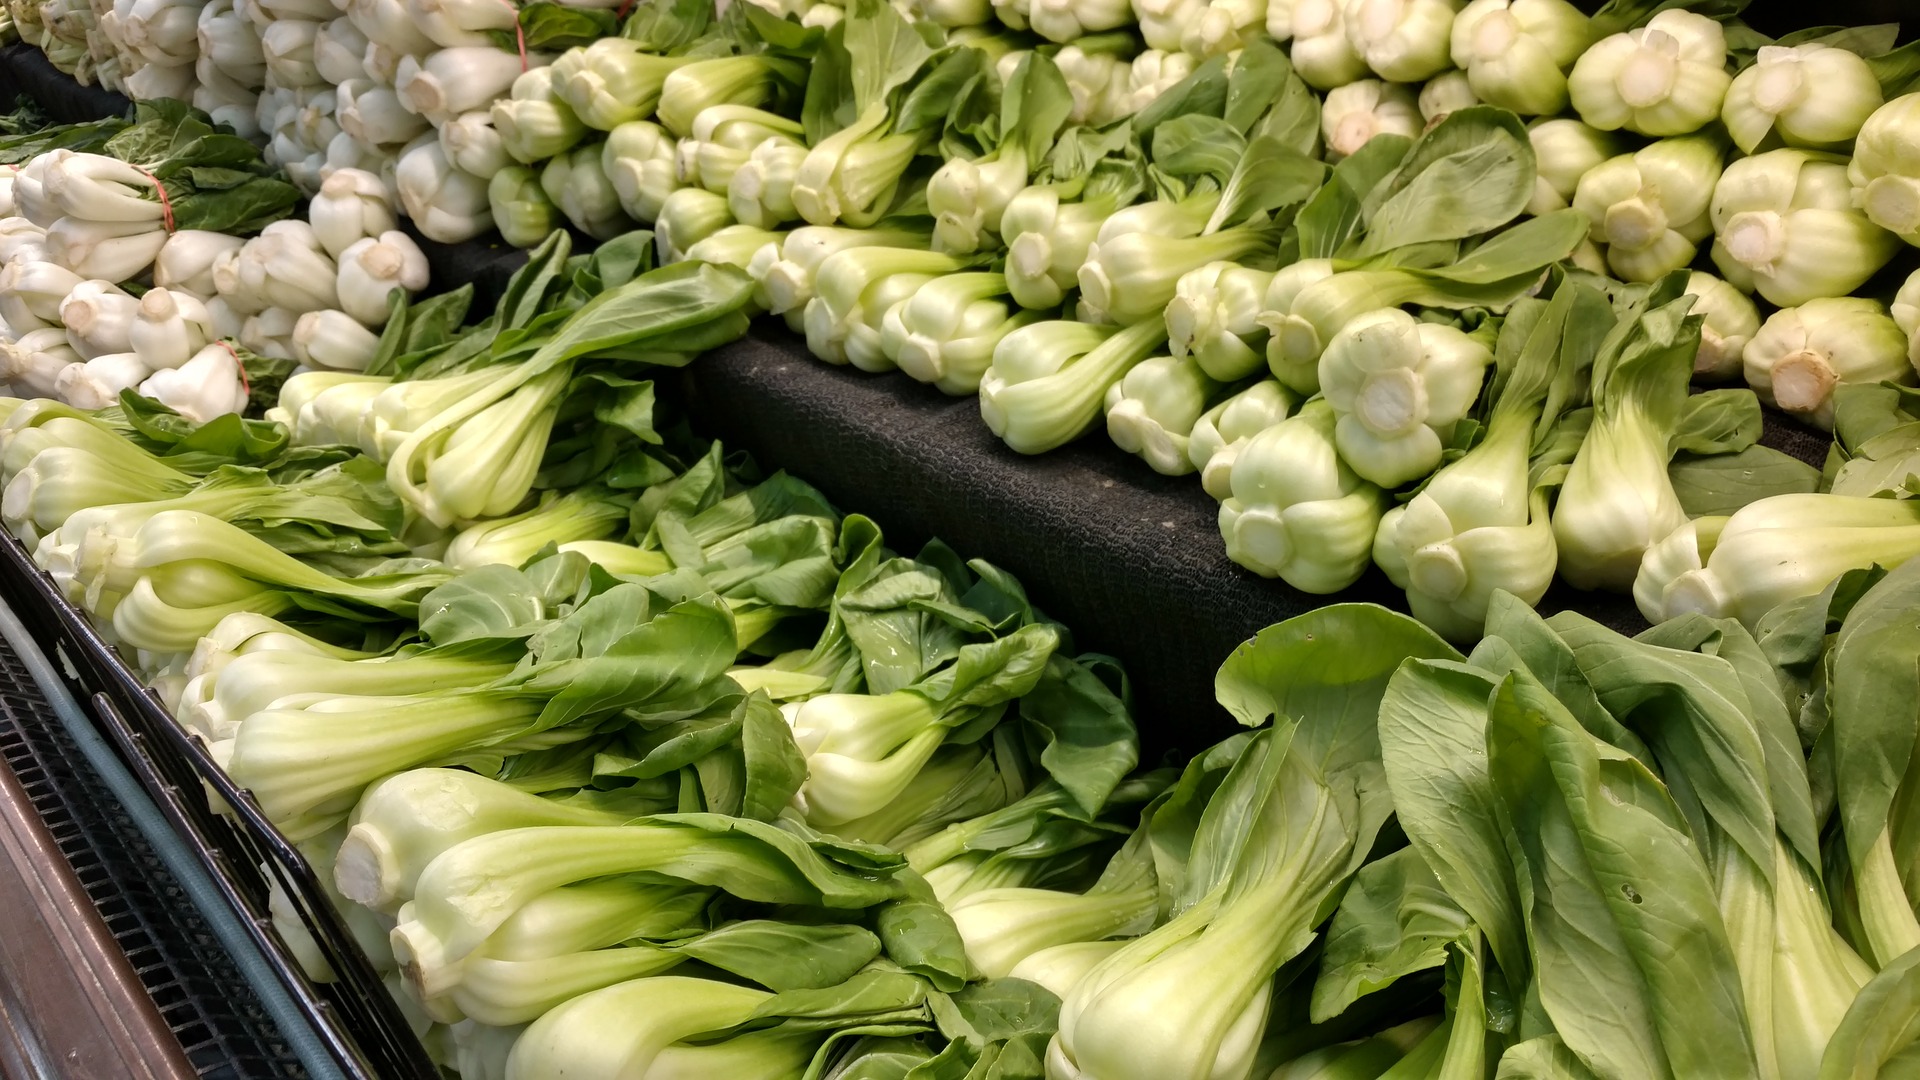 Can Dogs Eat Bok Choy - Ultimate Guide